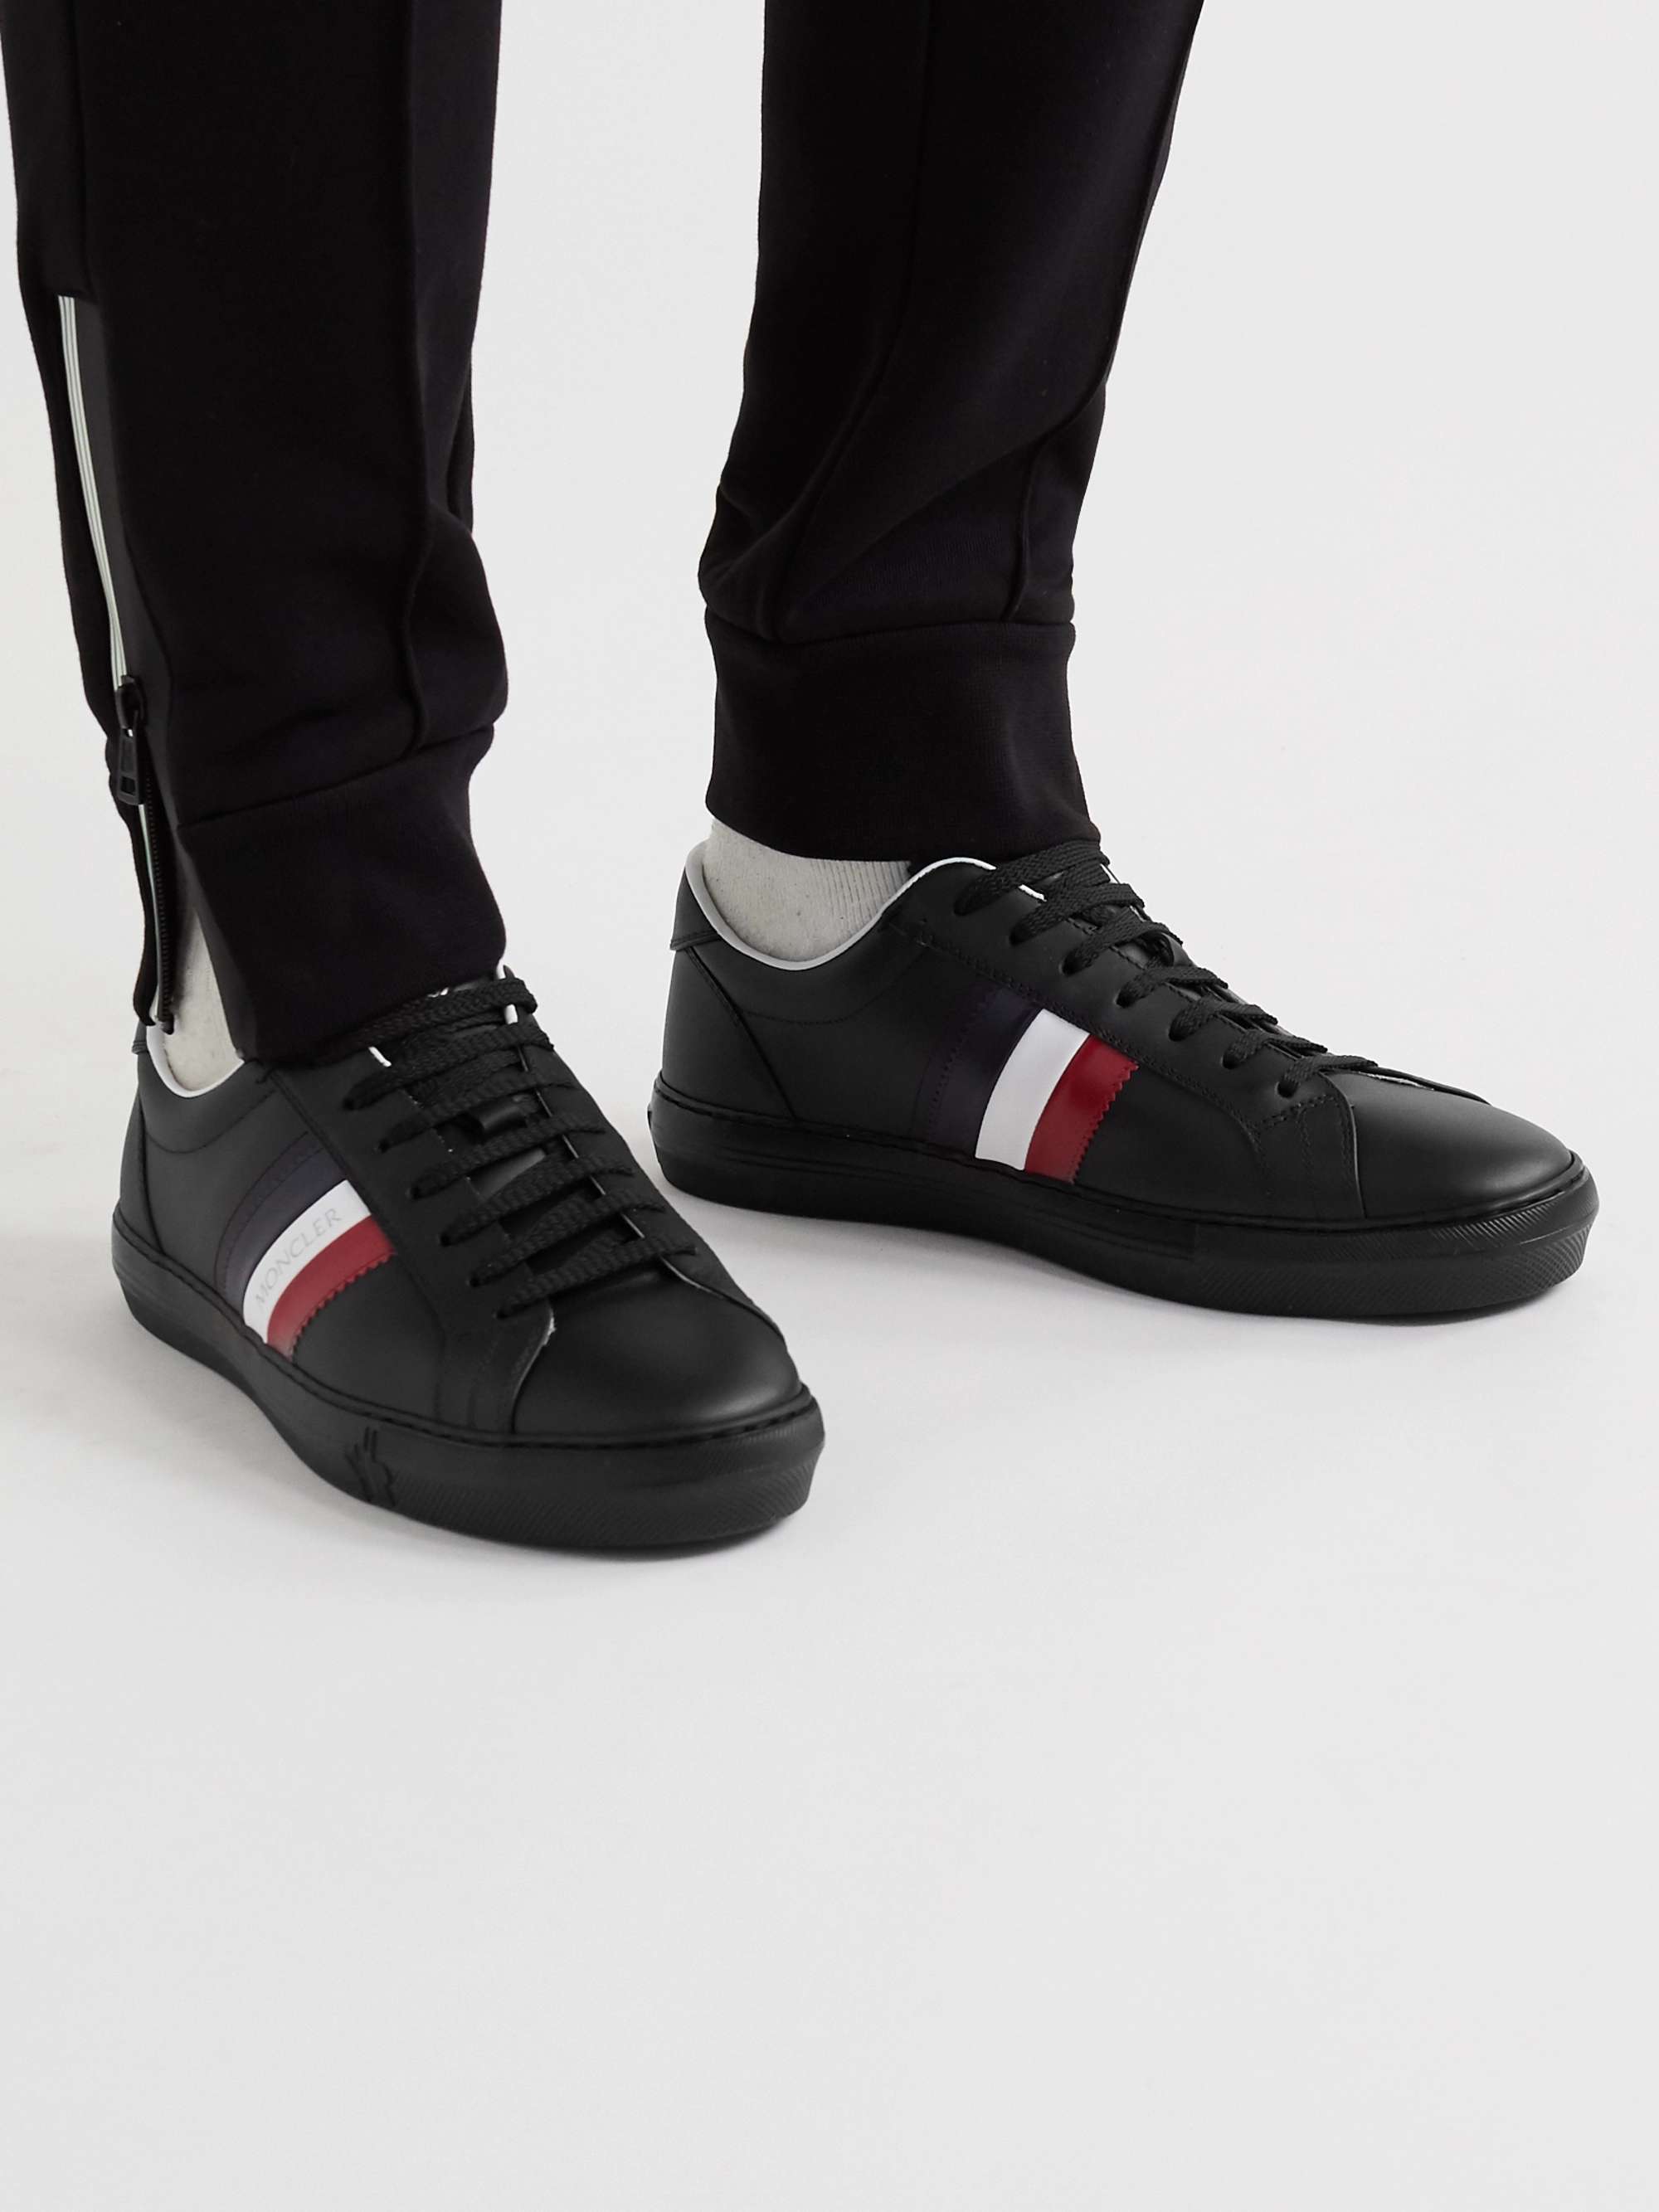 MONCLER New Monaco Striped Leather Sneakers | MR PORTER